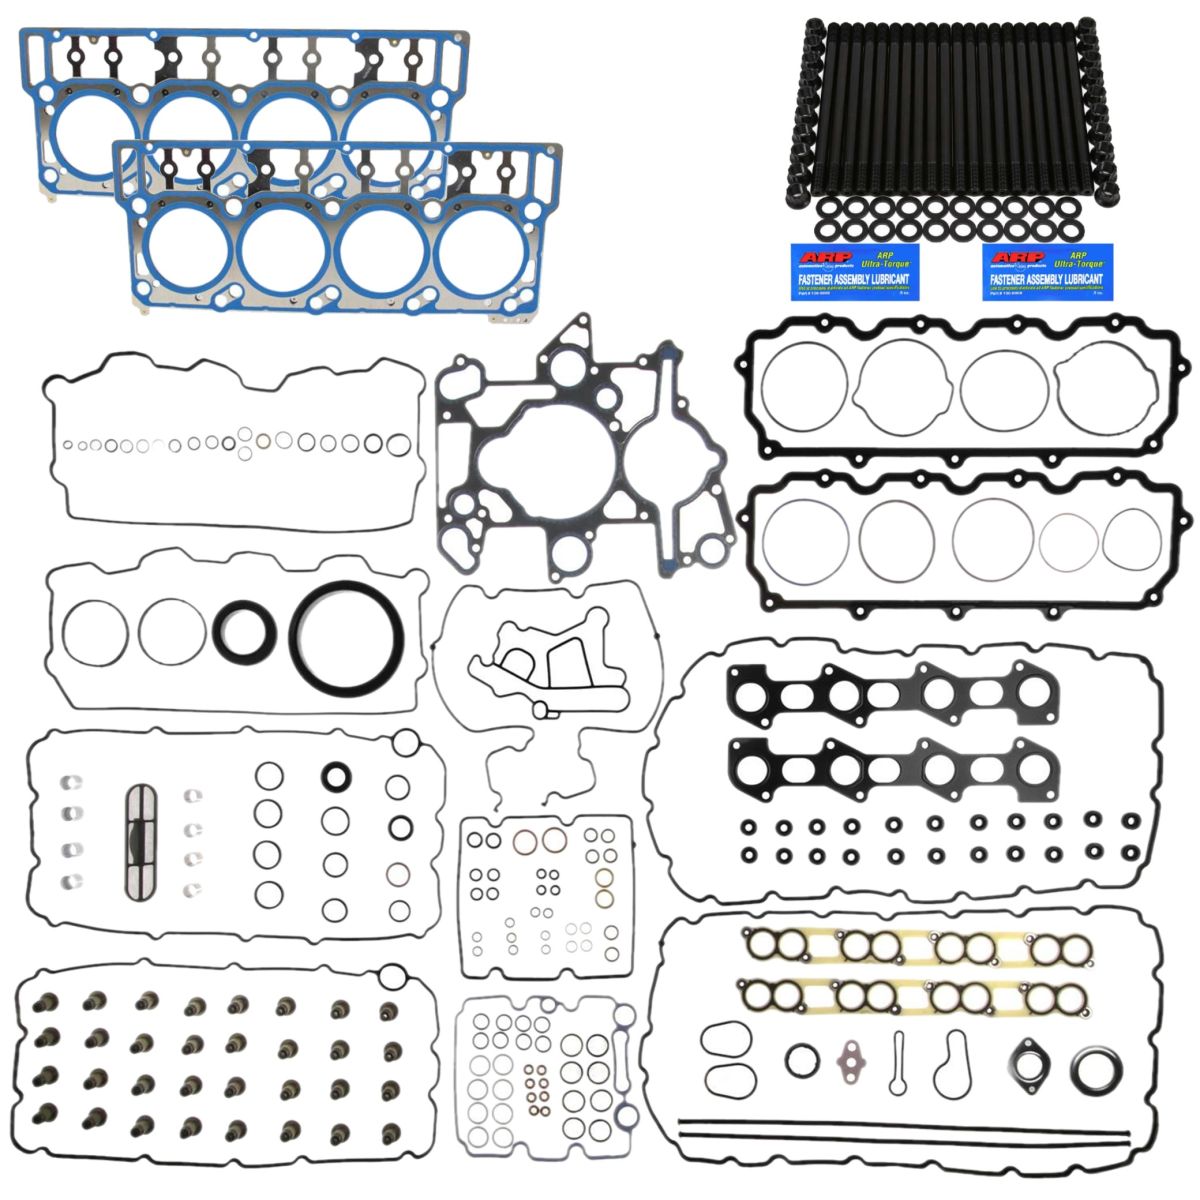 OEM Ford - OEM 20MM Head Gaskets/Gator Studs/Mahle Gaskets For 06-10 Ford 6.0L Powerstroke